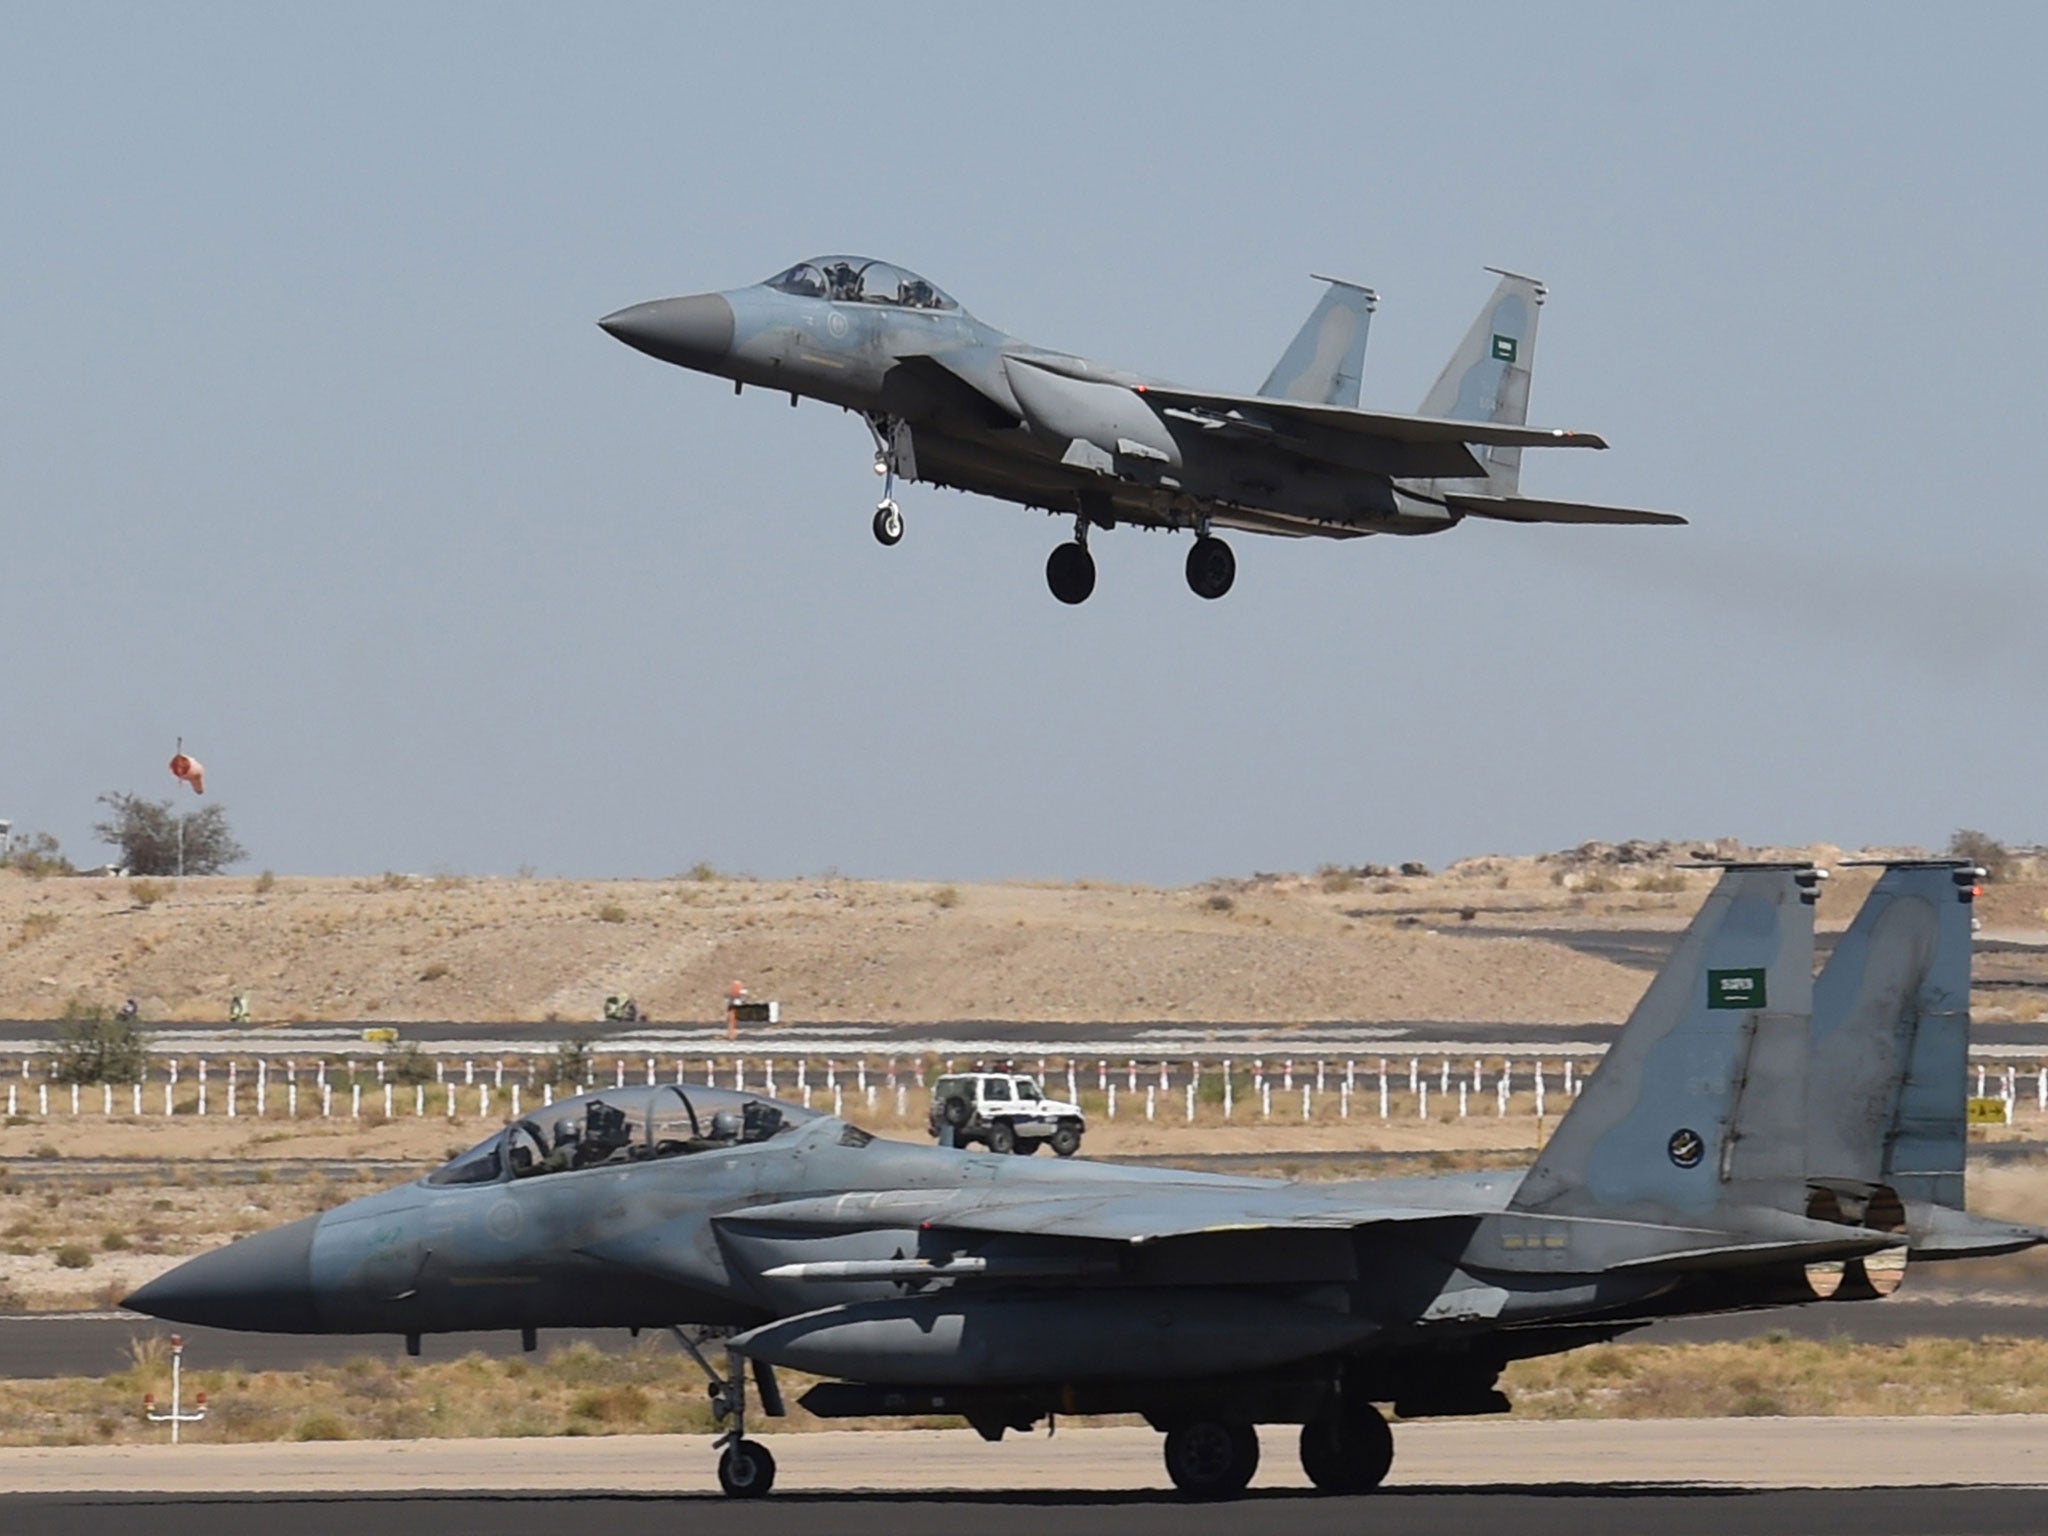 There were reports of Royal Saudi Air Force F-15 jets arriving at Incirlik Air Base in Turkey on Saturday morning